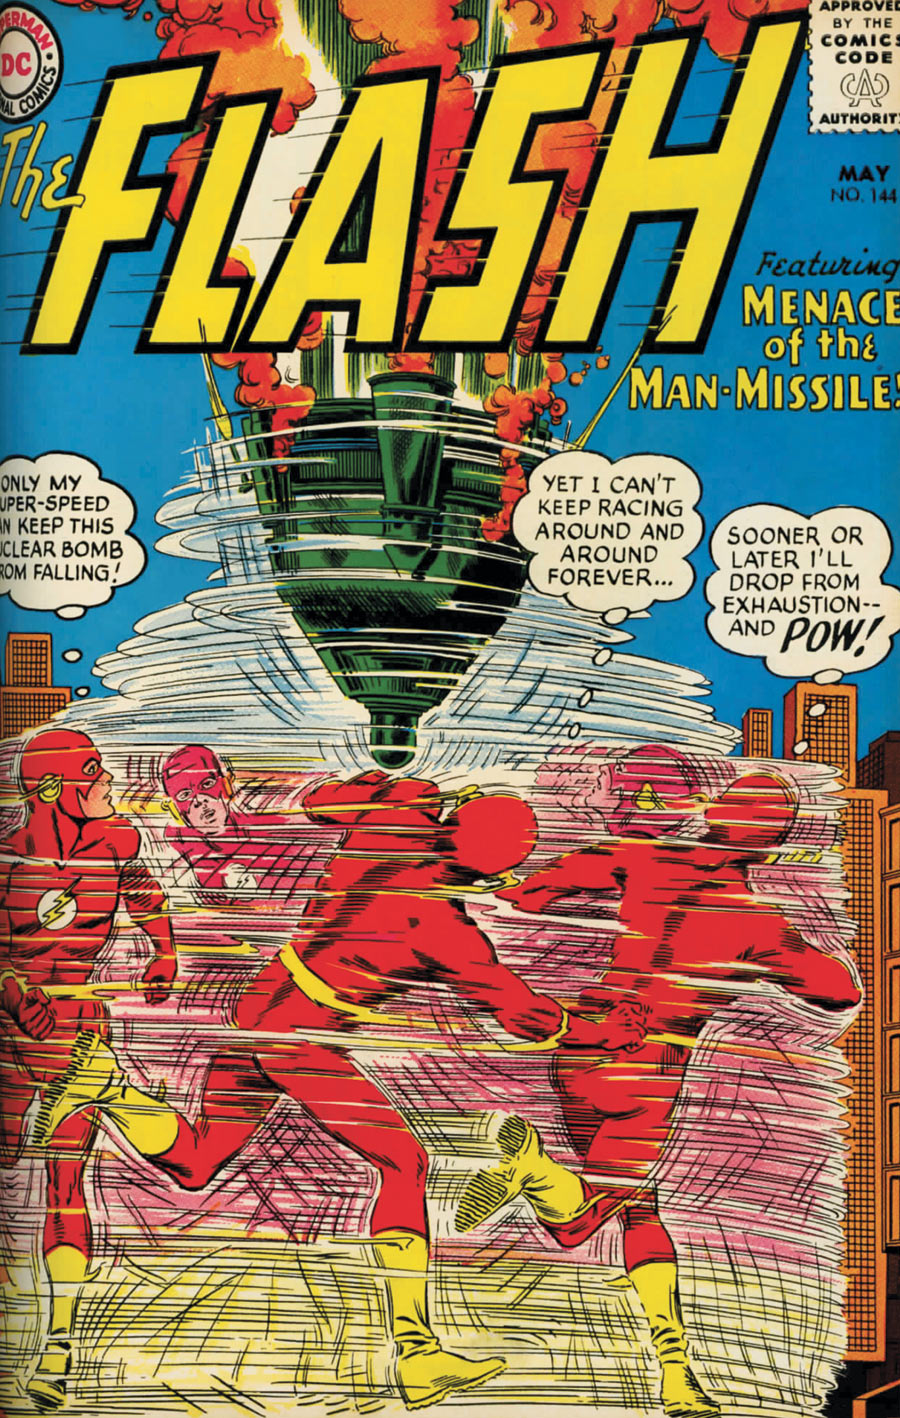 THE FLASH ARCHIVES VOL. 6 HC